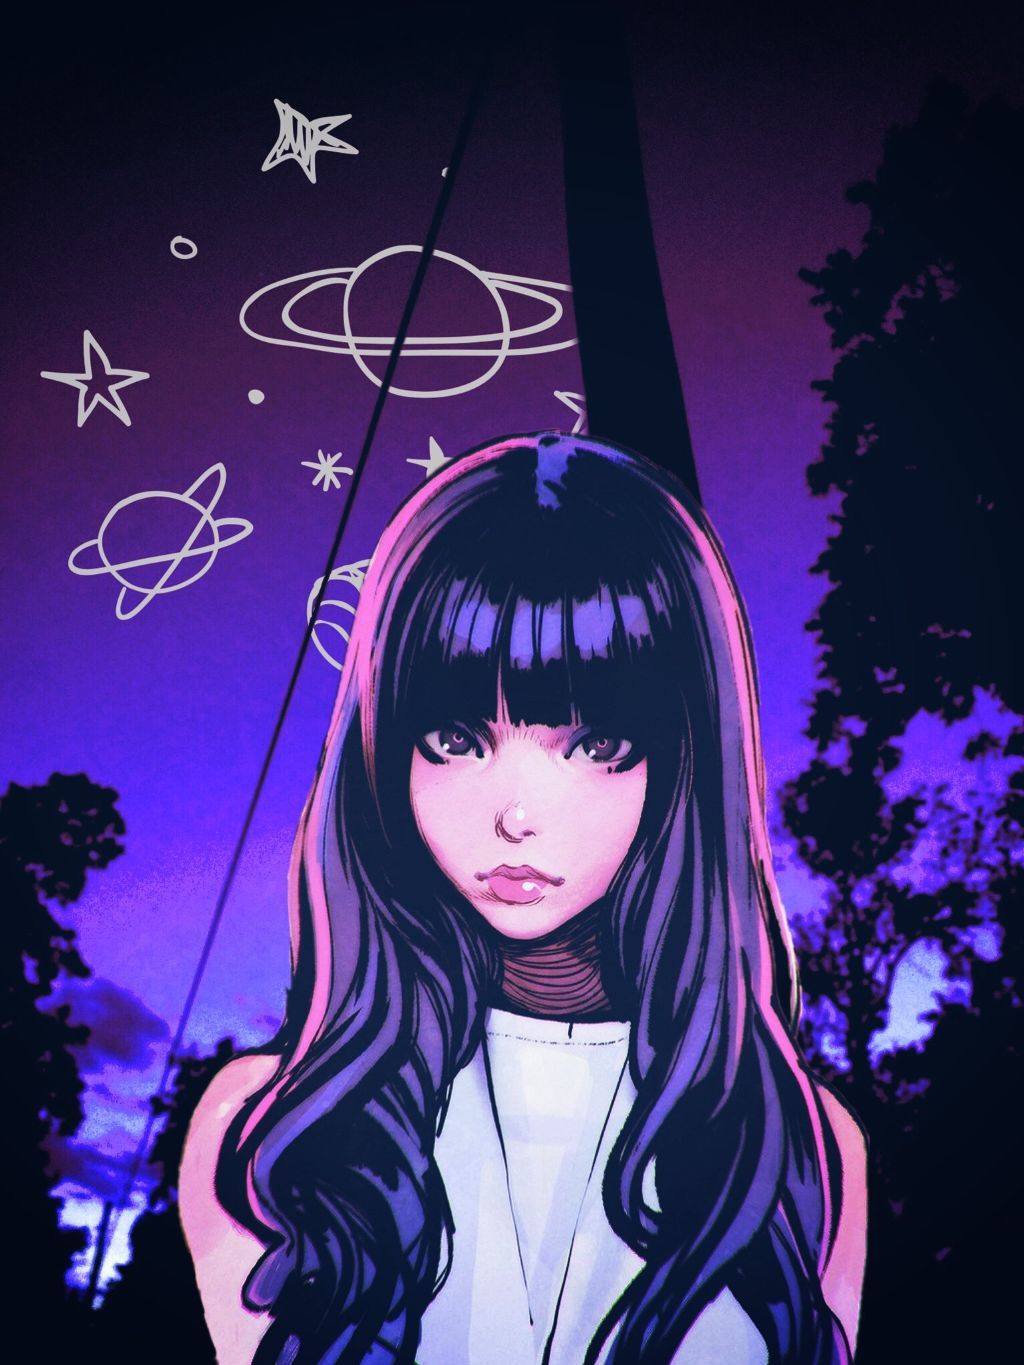 Anime Wallpapers Aesthetic Purple Images Wallpaper Aesthetic